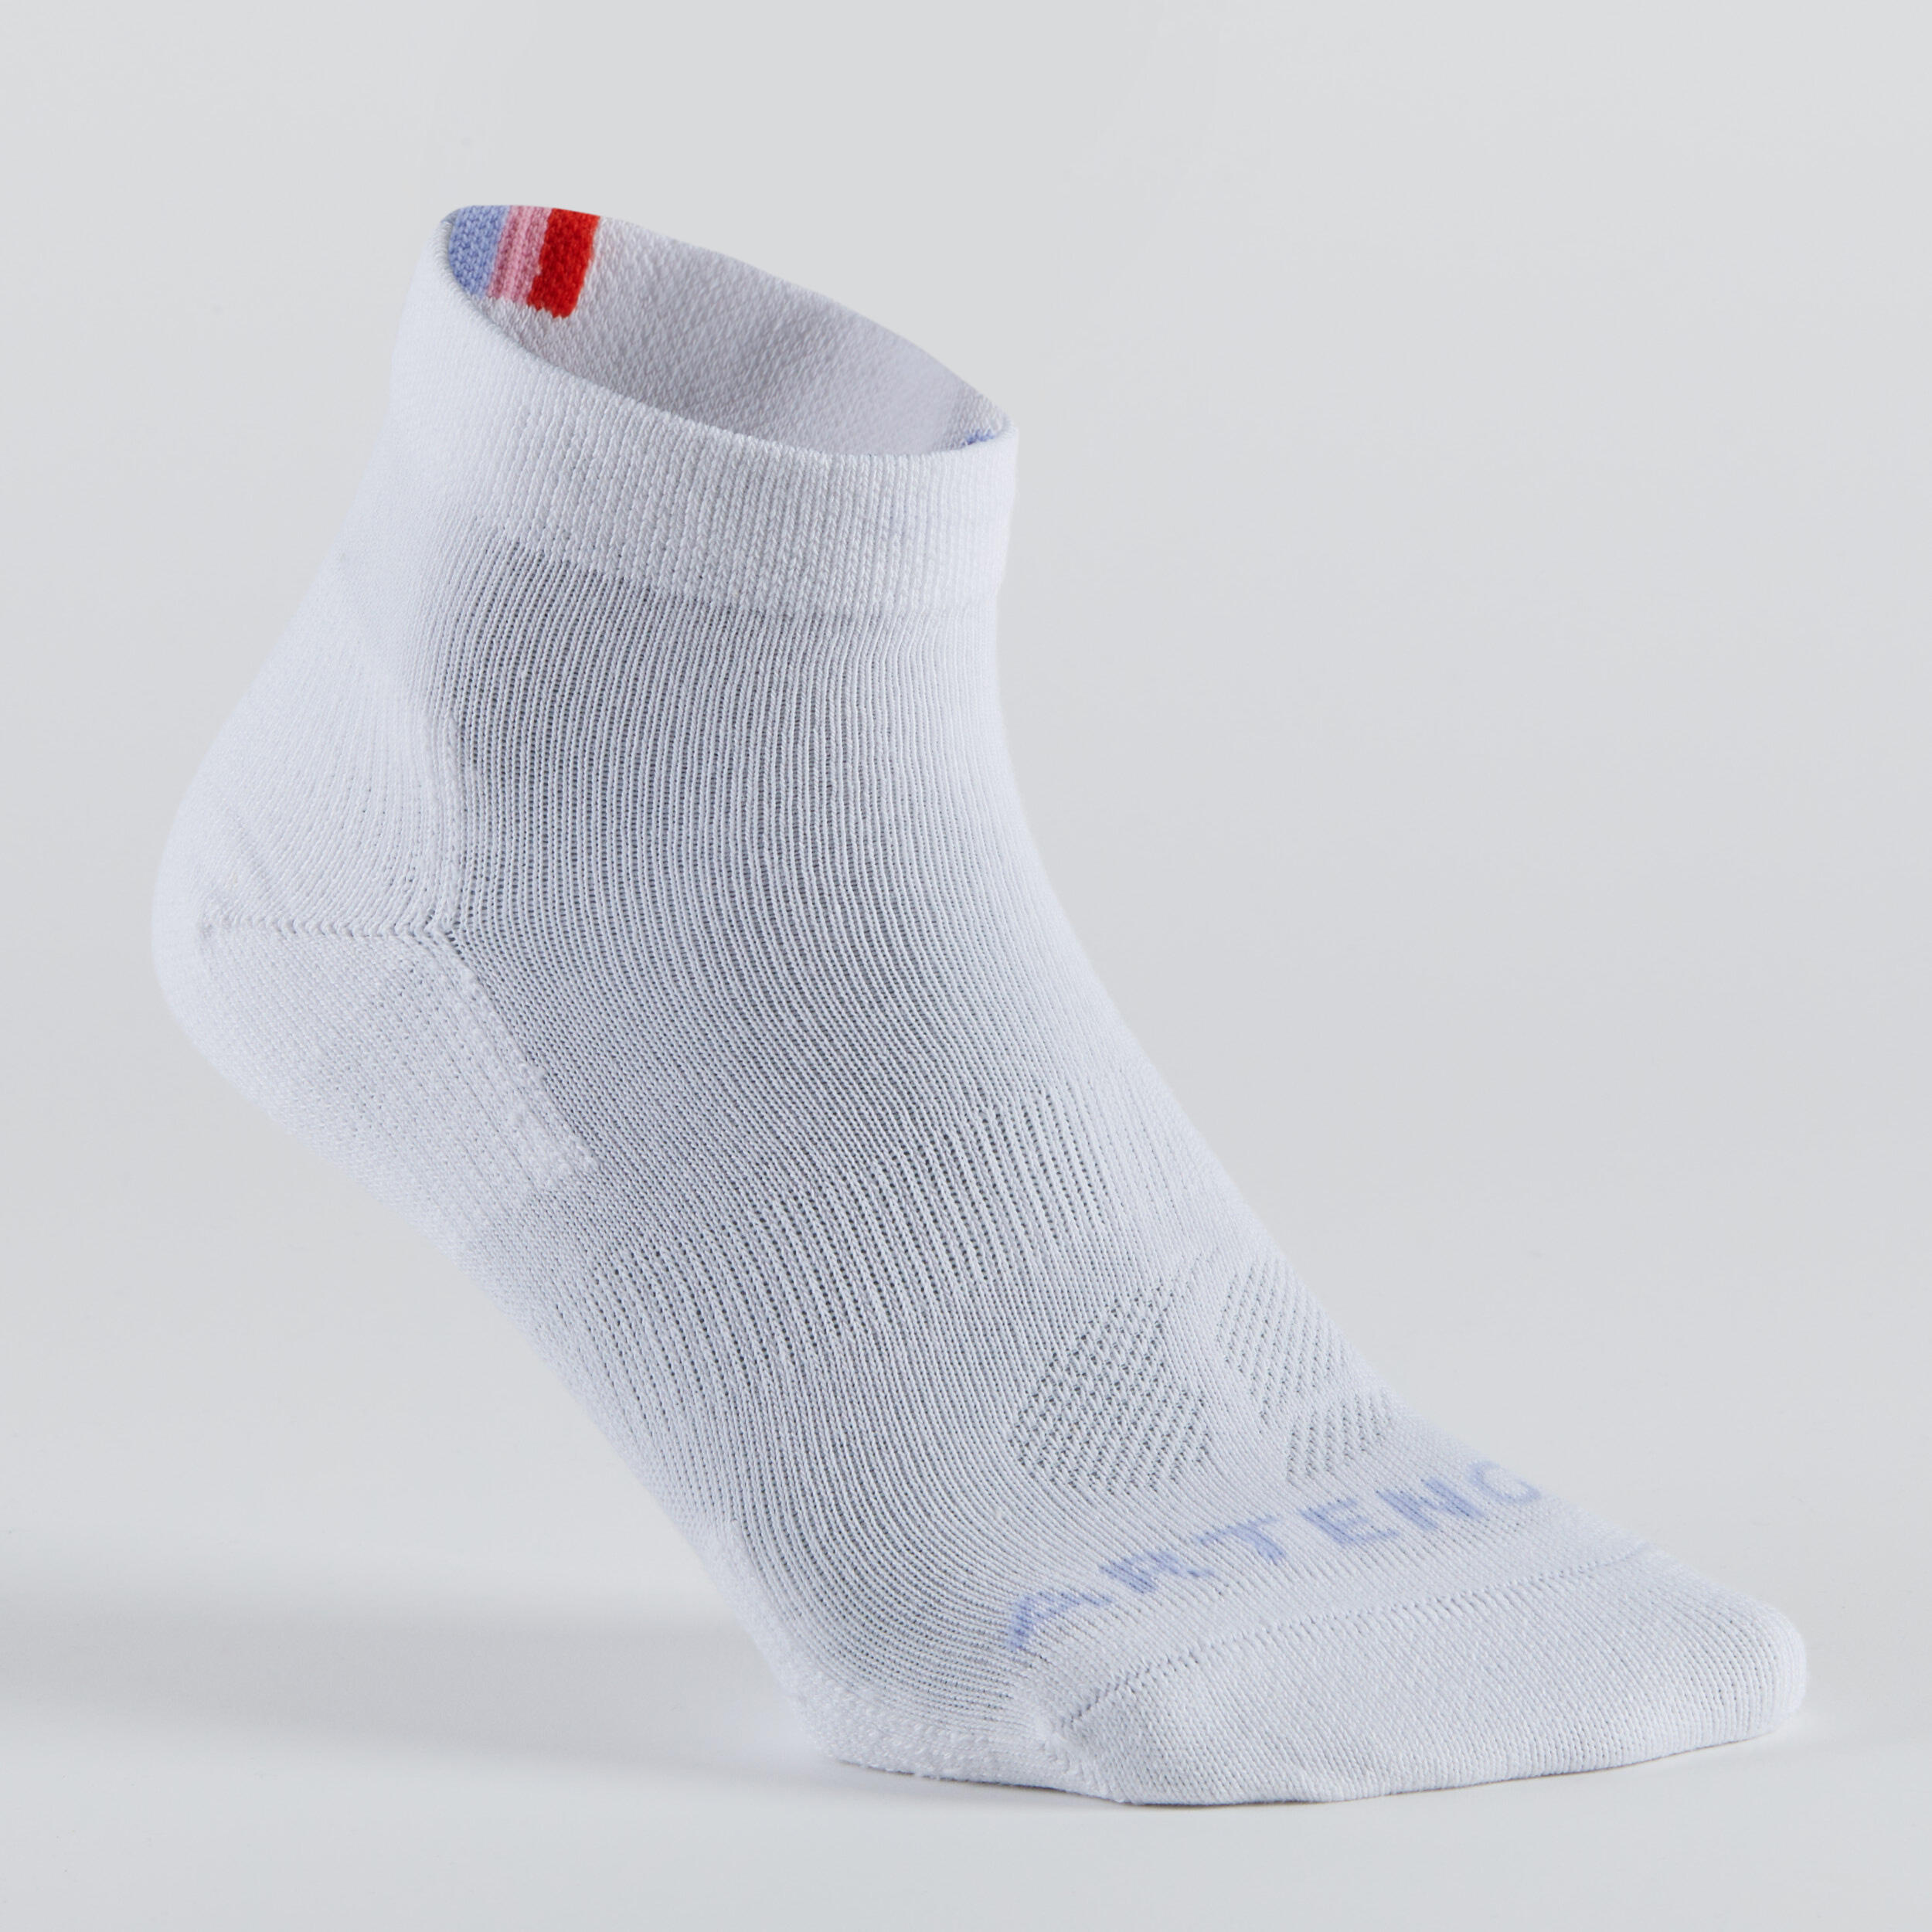 Mid Sports Socks RS 160 Tri-Pack - Purple and White Patterns 3/10